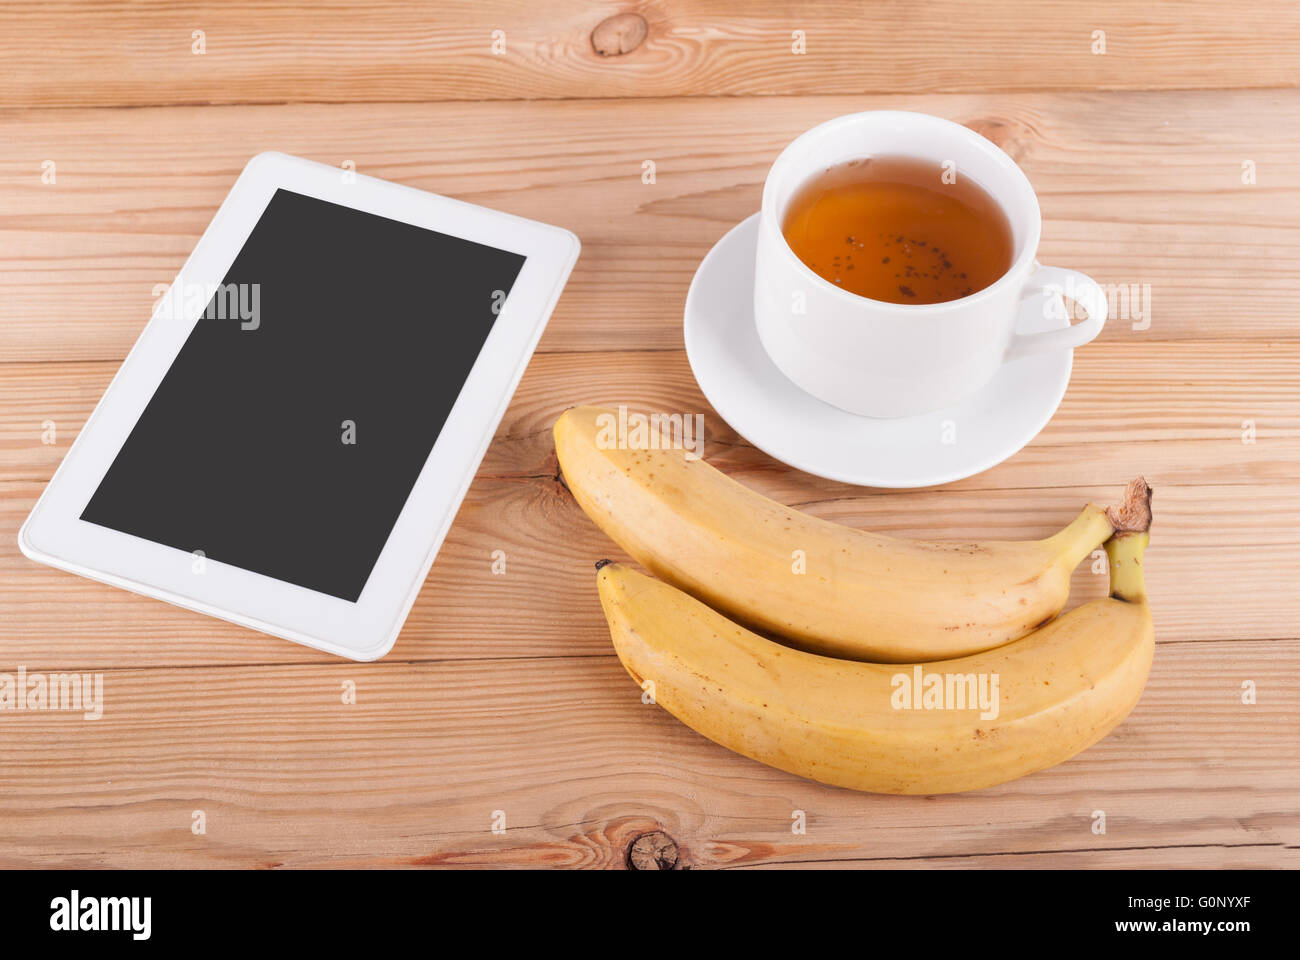 Digital tablet cup of tea and bananas on a wooden table. Stock Photo